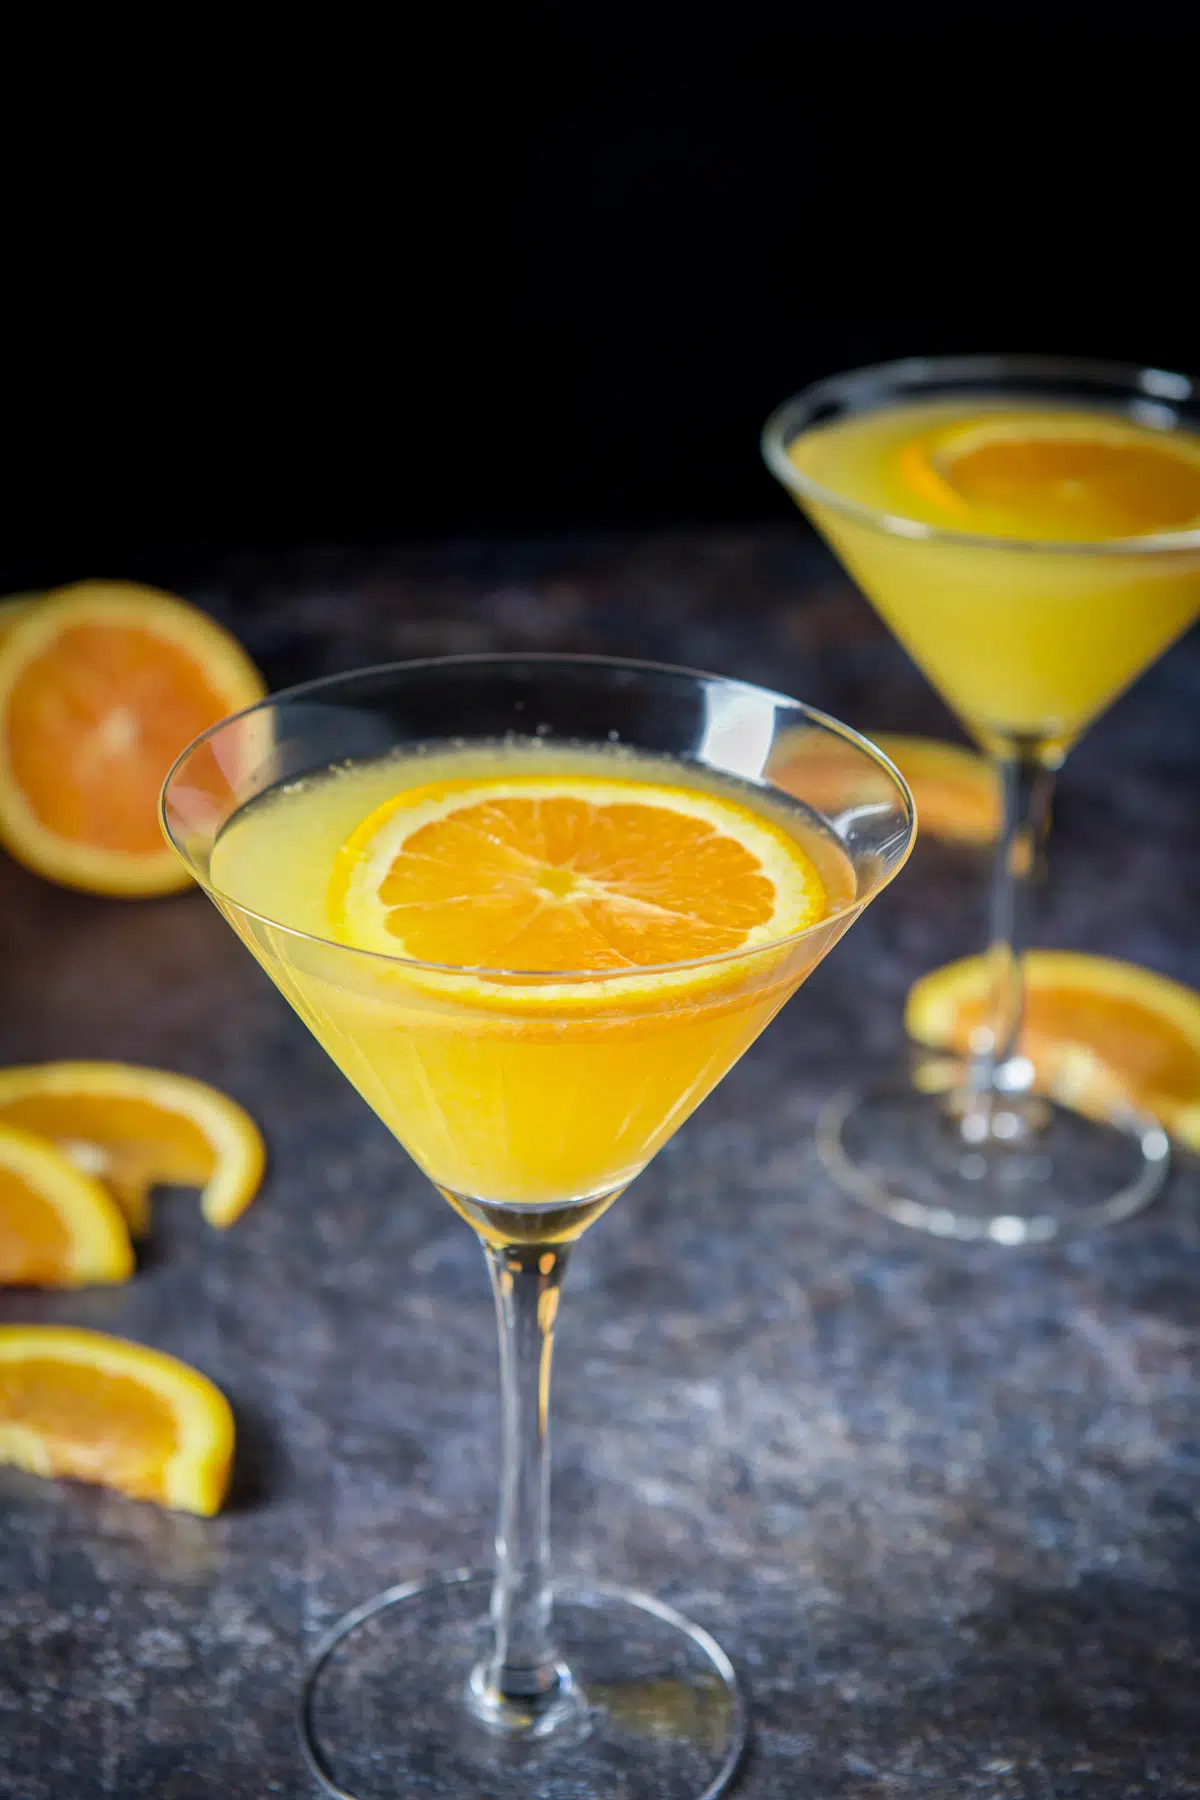 Close view of the glasses of the martini with orange slices floating on top